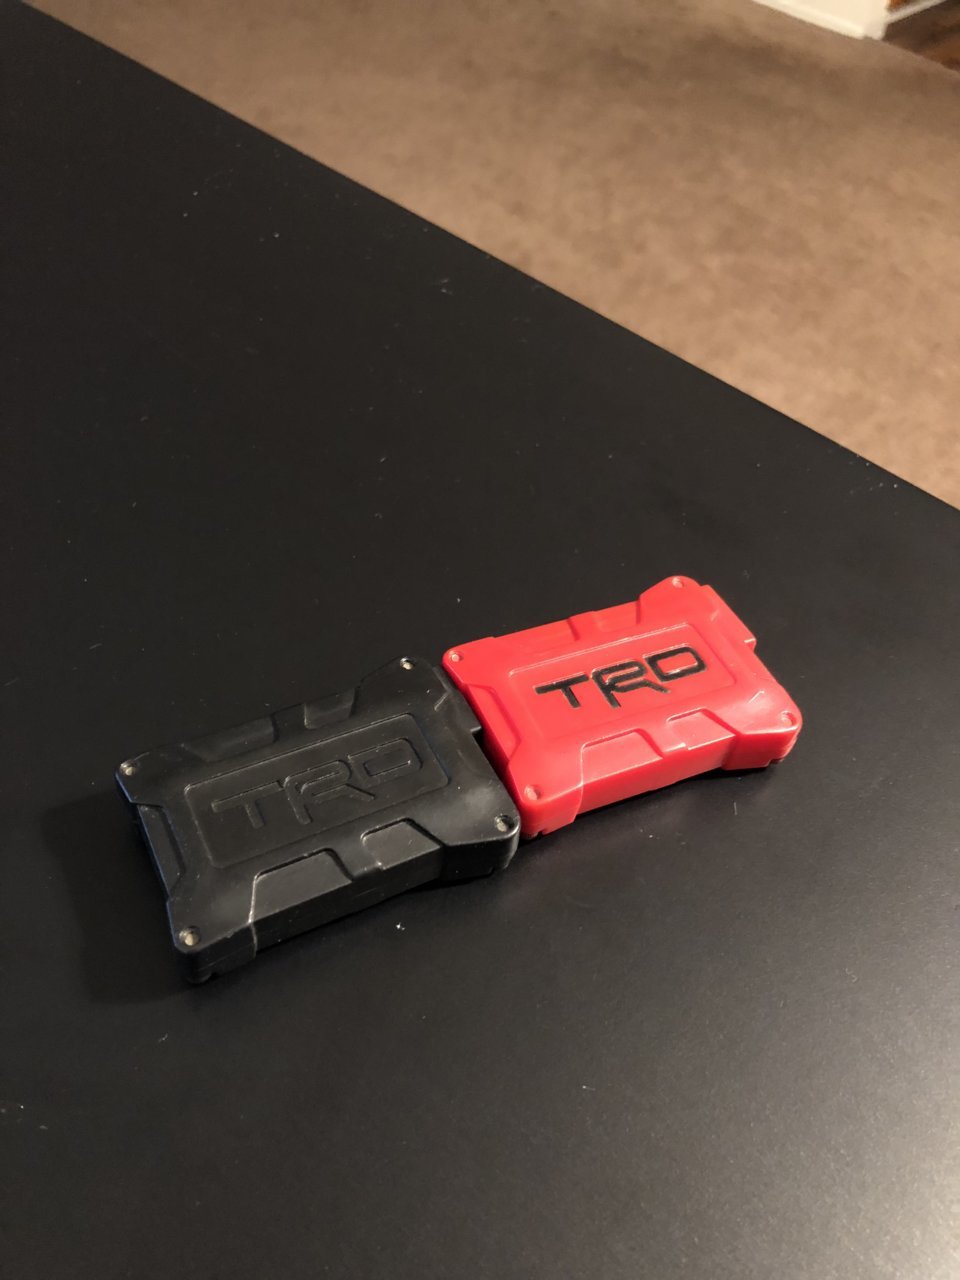 Two (2) AJT TRD Key Fobs Red and Black | Tacoma World